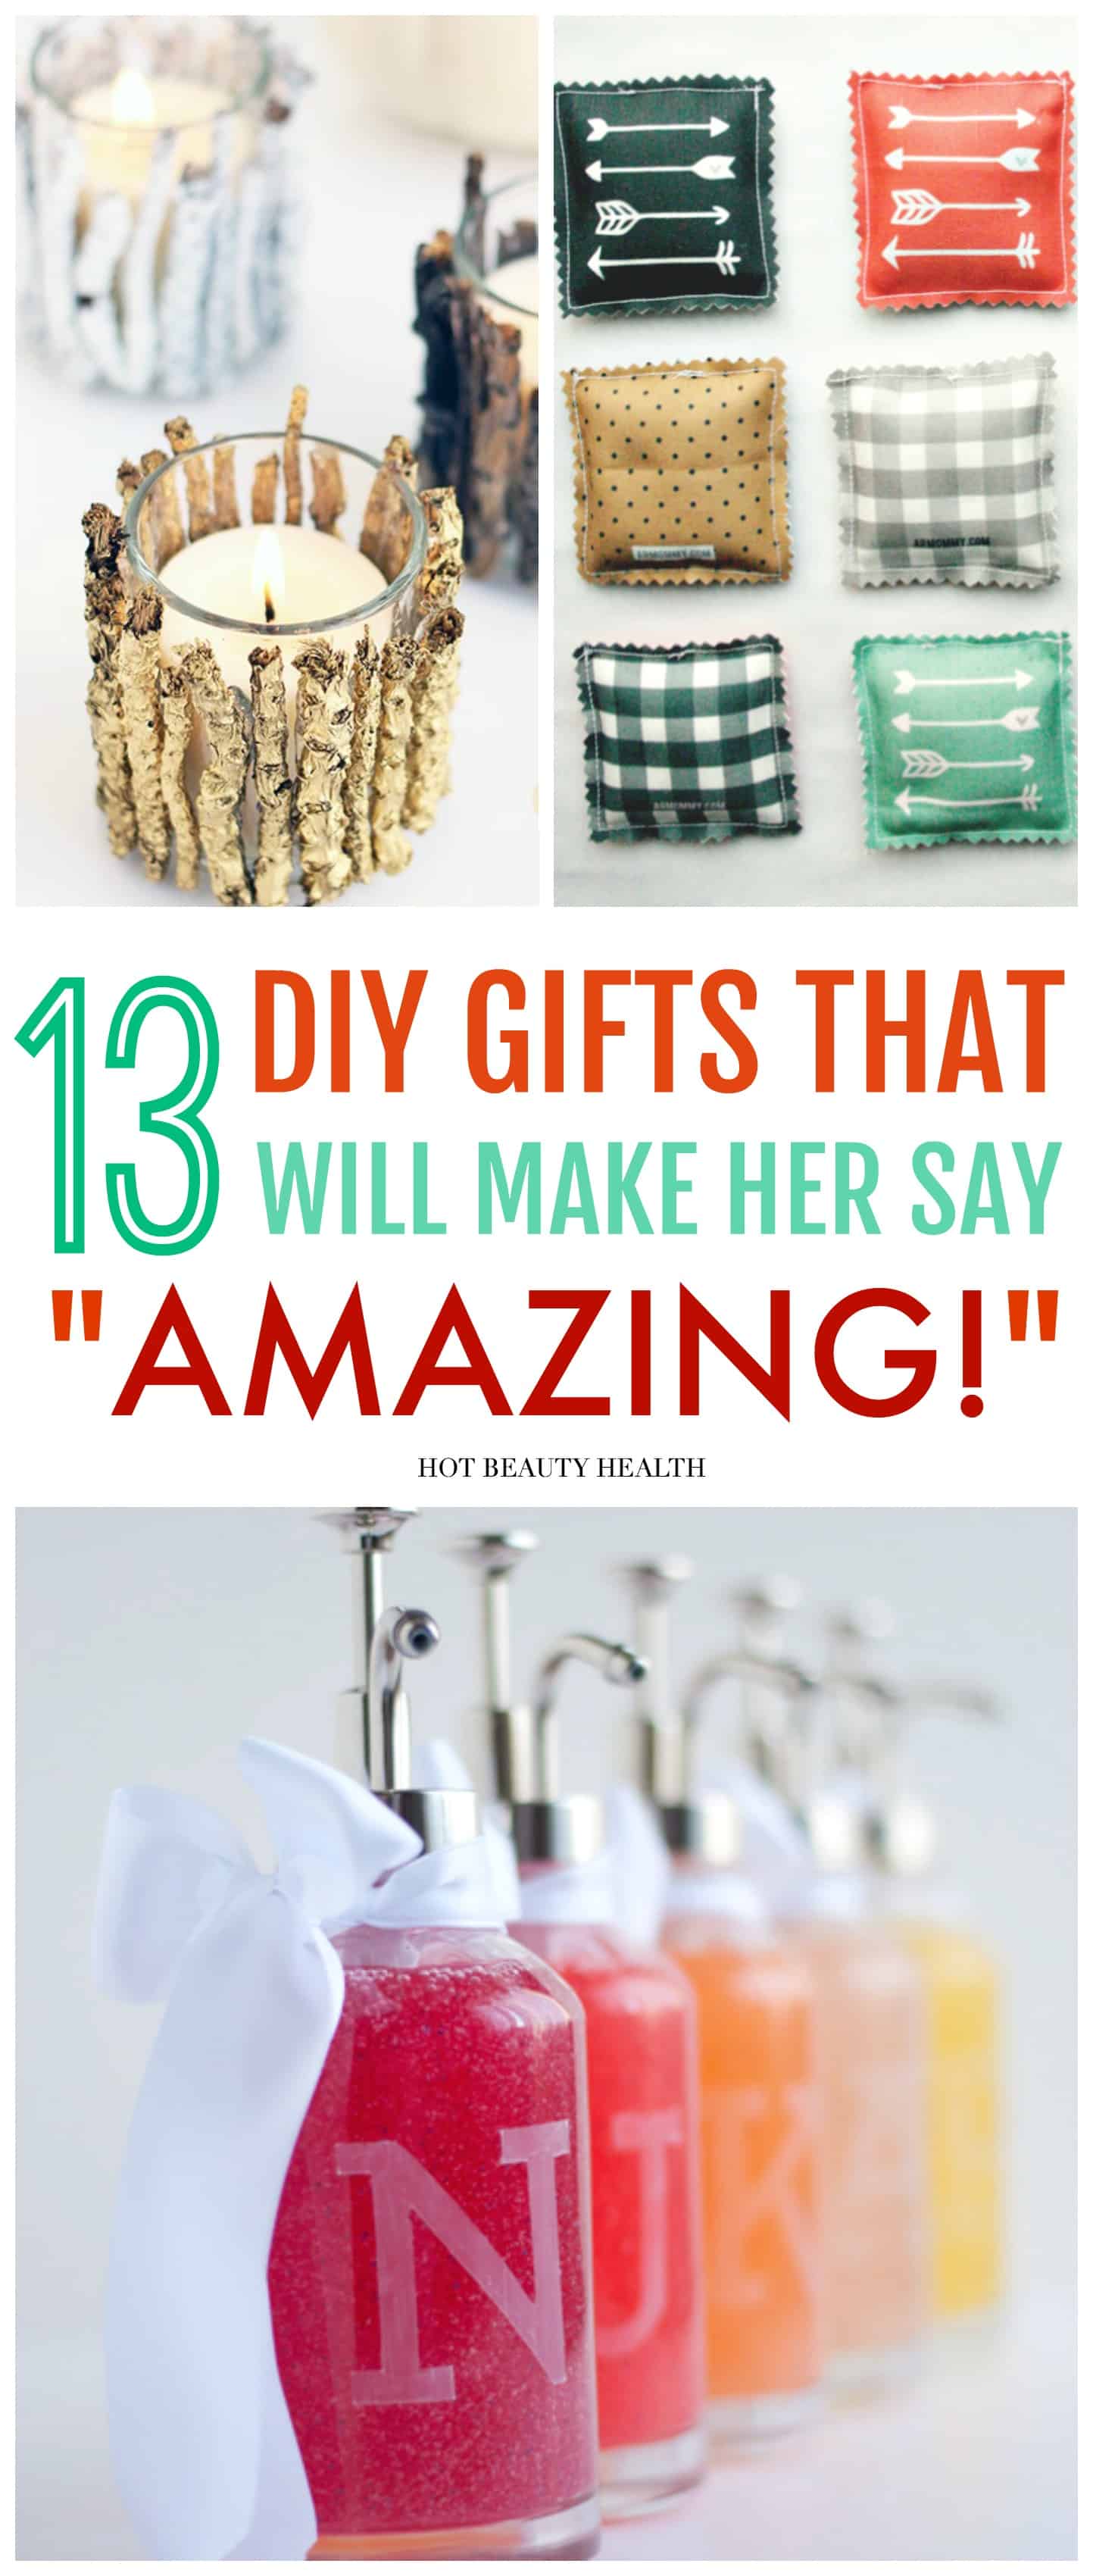 13 Amazing DIY Gift Ideas for Christmas People Actually Want! These are great homemade gifts to give to your mom, friends or any women in your life!! Men too! I want them all!